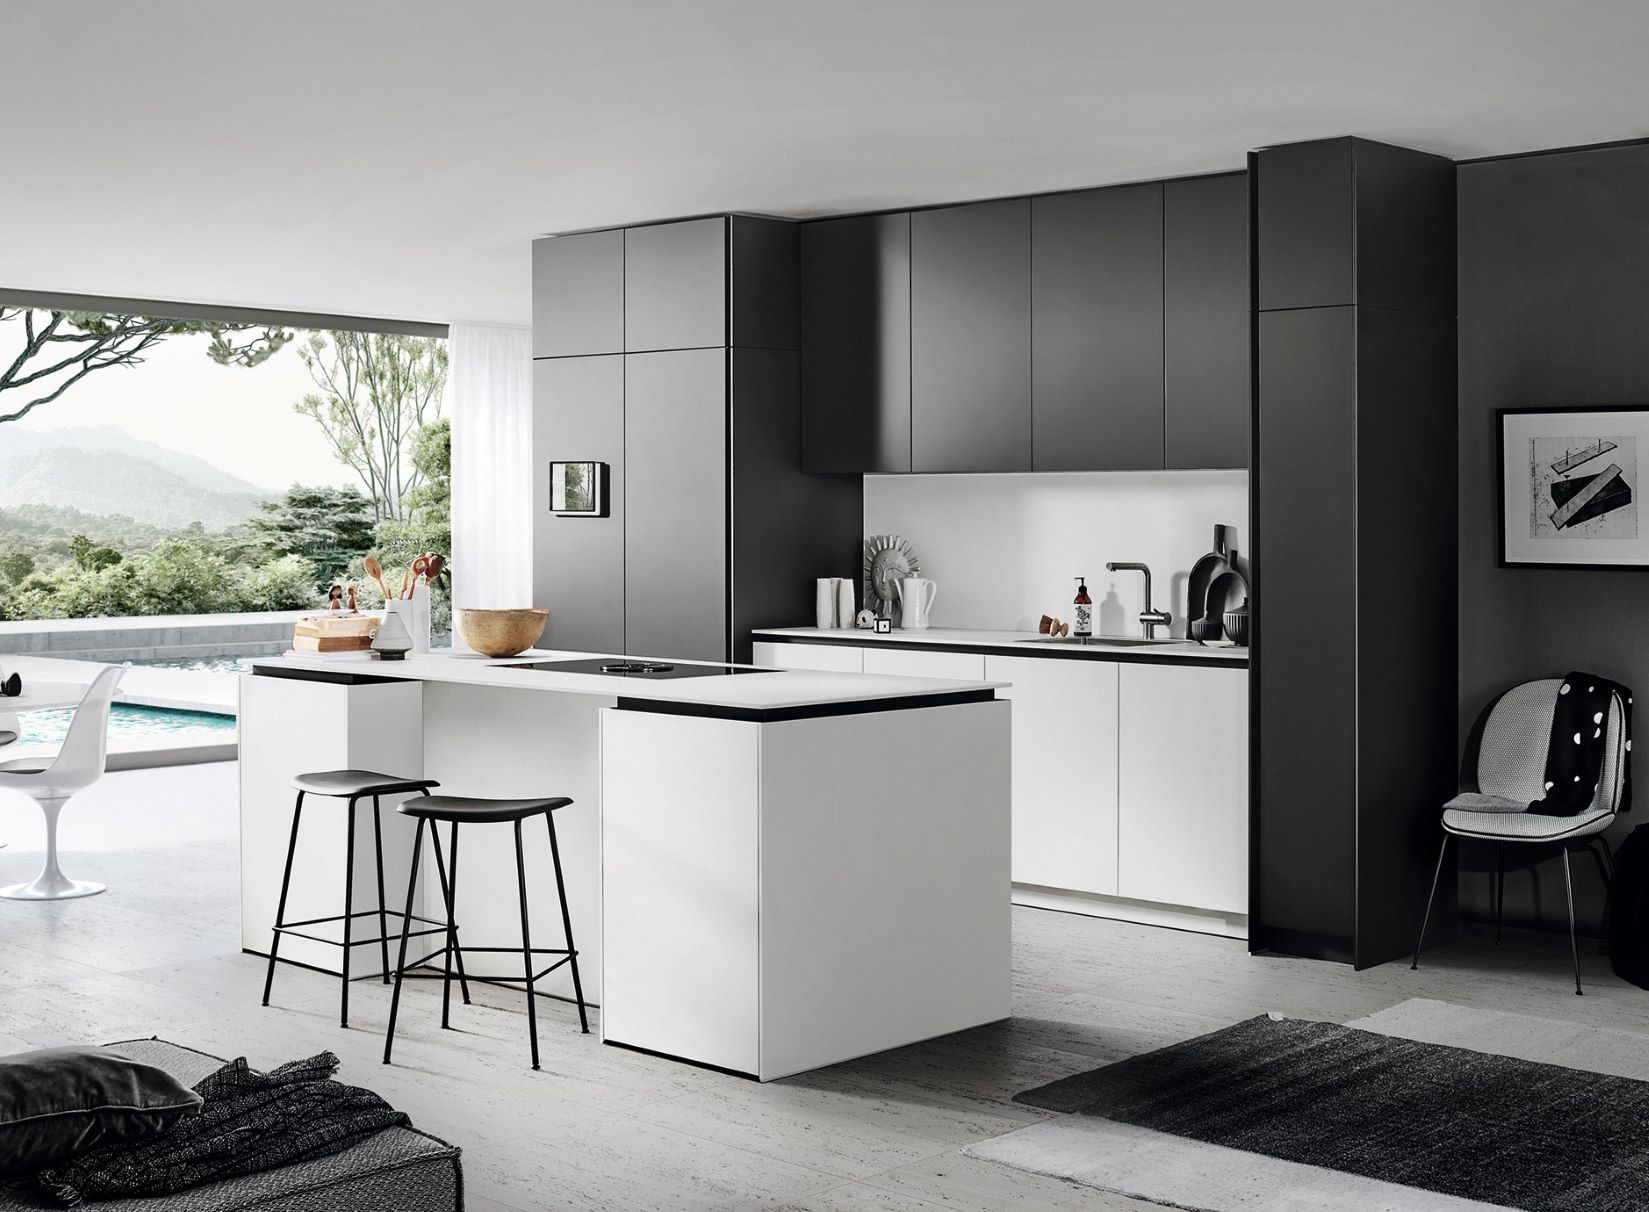 How Do Poggenpohl Kitchens Compare With Other German Kitchen Brands